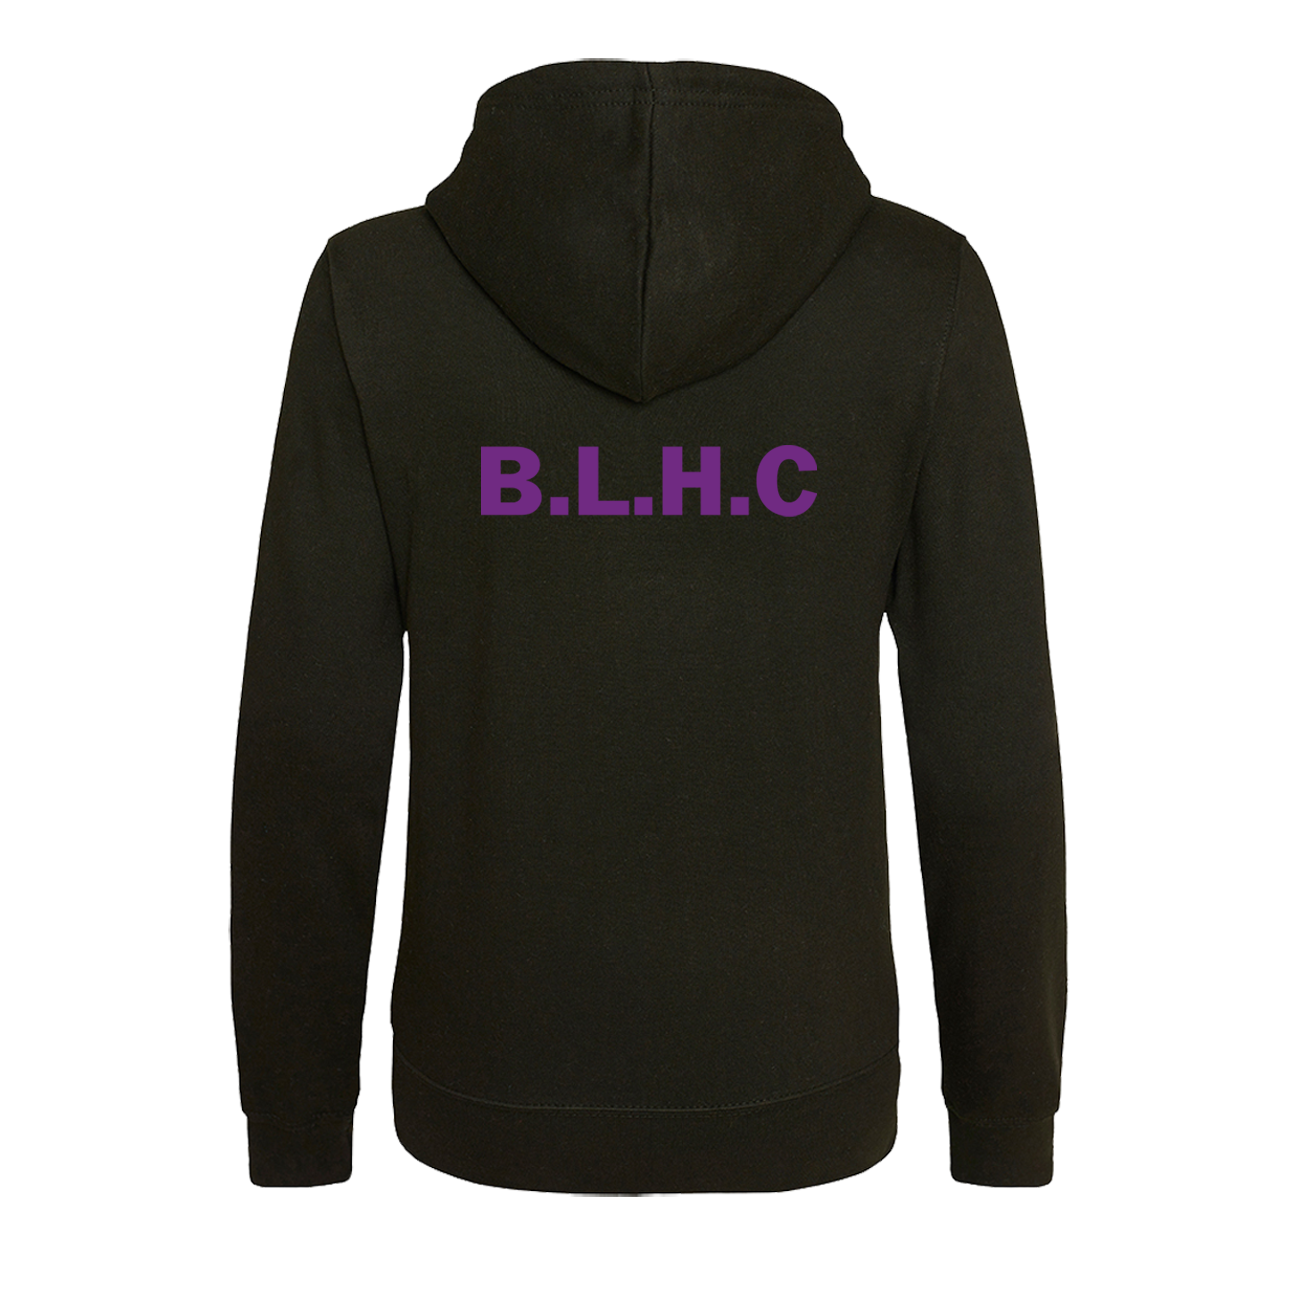 BLHC Ladies Zipped Hooded Top